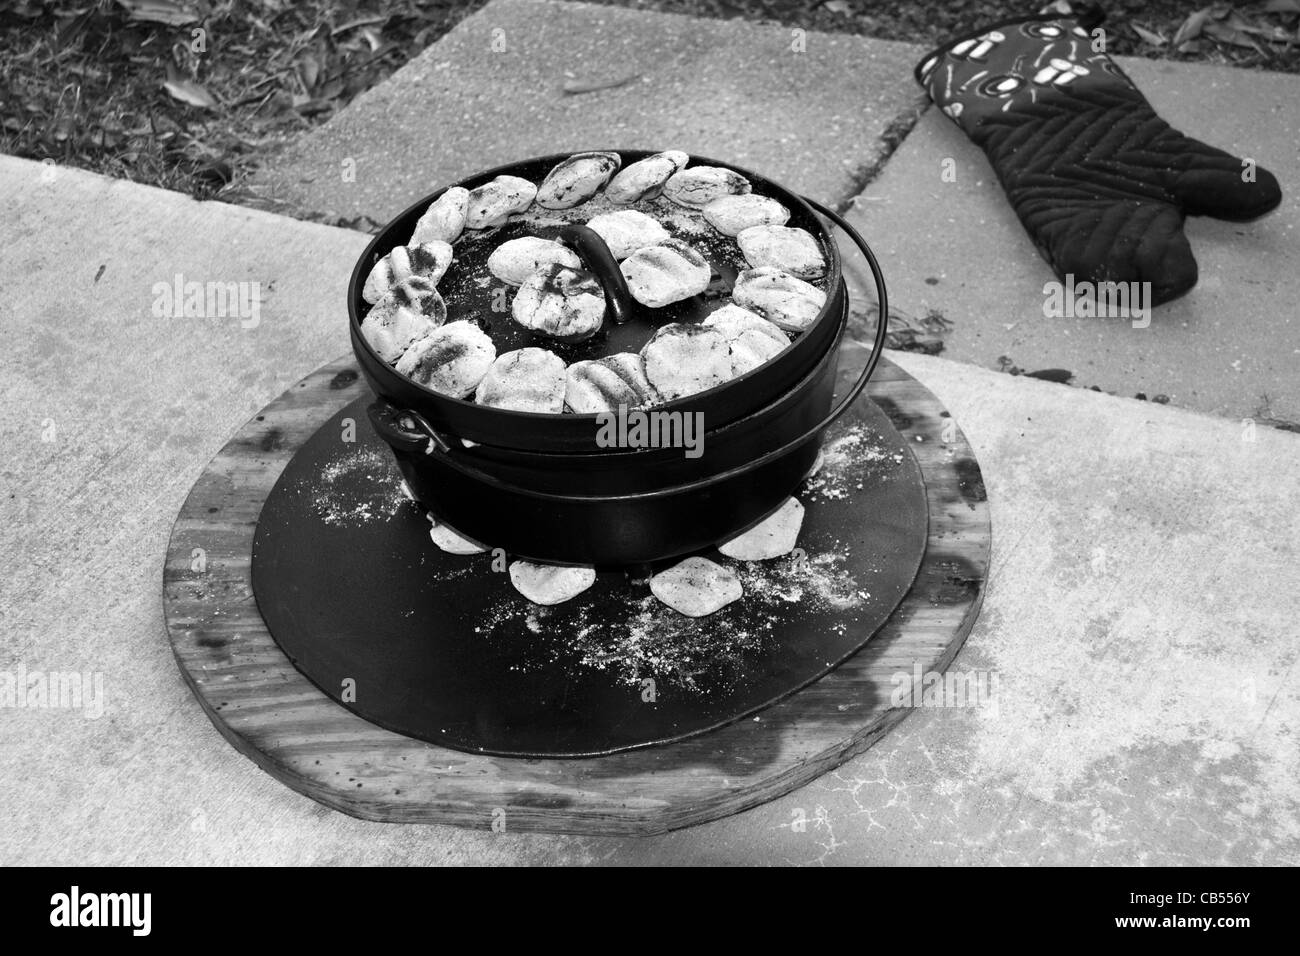 Black cooking pots Black and White Stock Photos & Images - Alamy